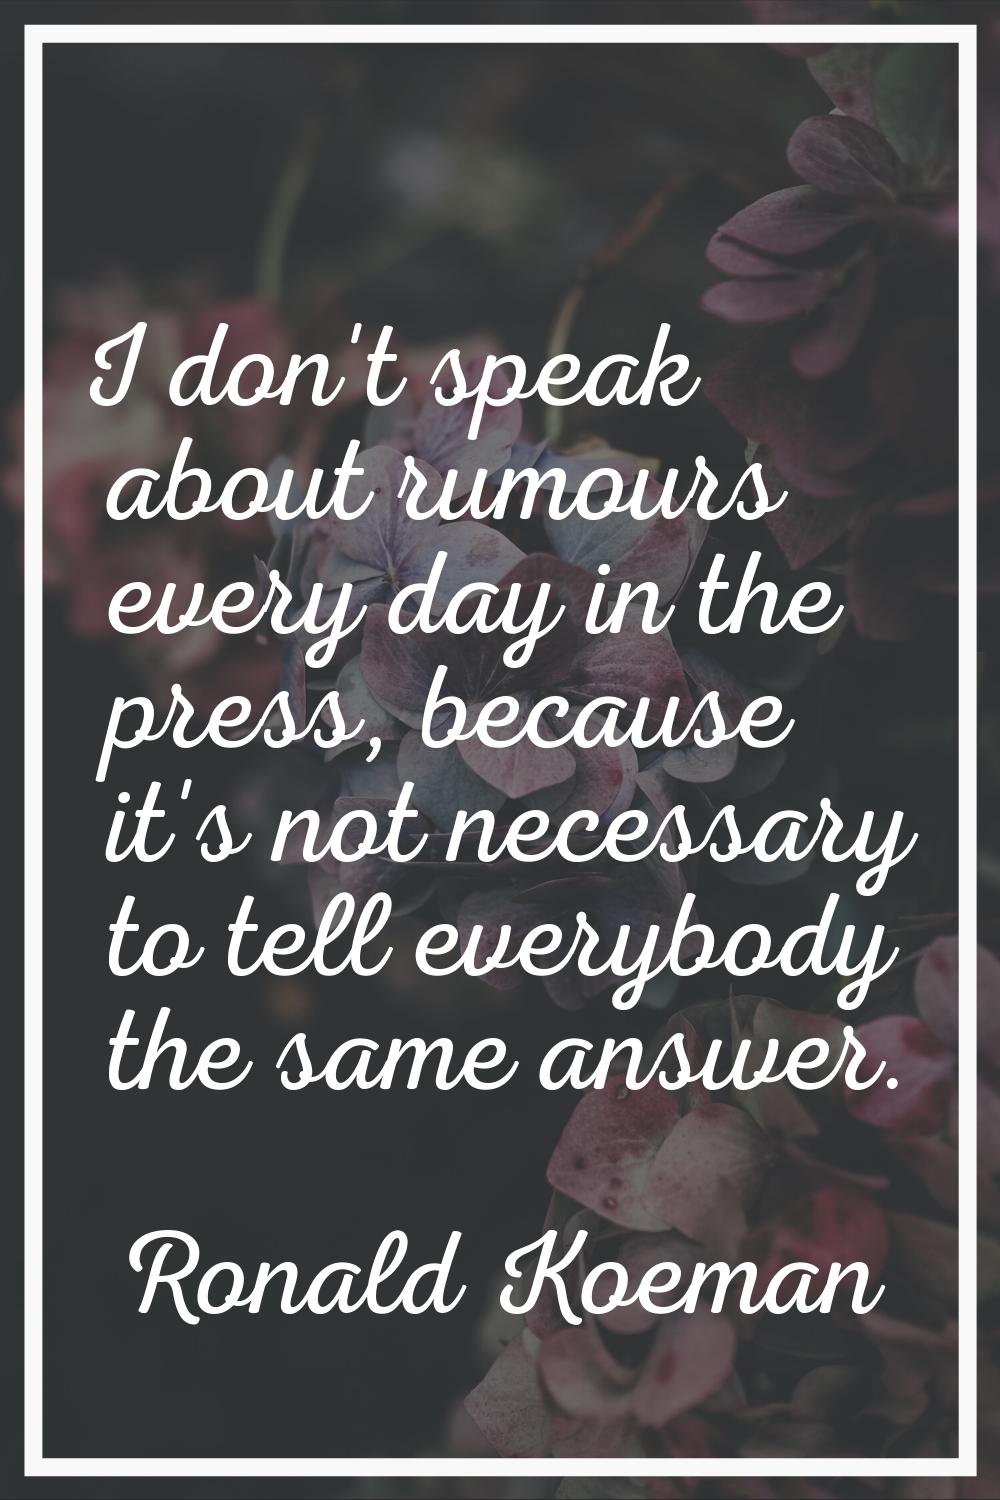 I don't speak about rumours every day in the press, because it's not necessary to tell everybody th